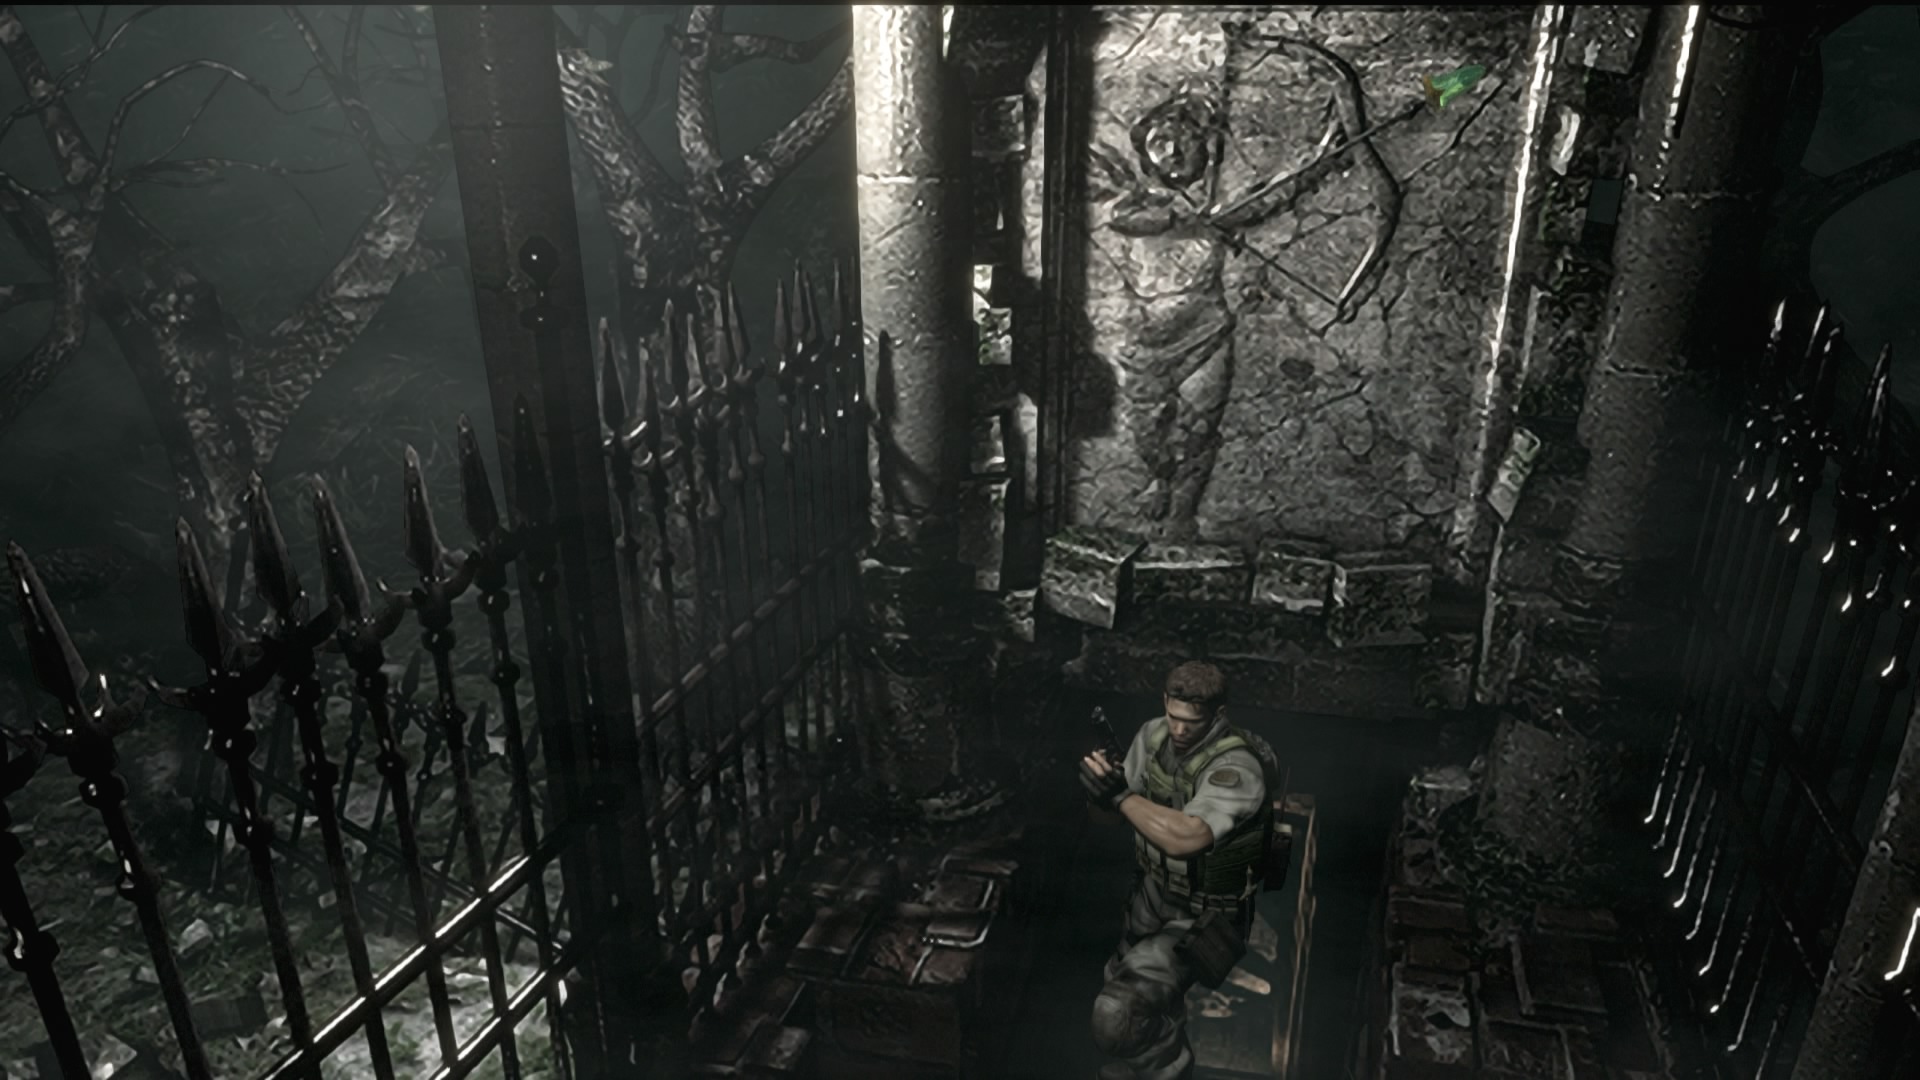 Resident Evil HD Remaster corre a 1080p/30fps na PS4 e Xbox One